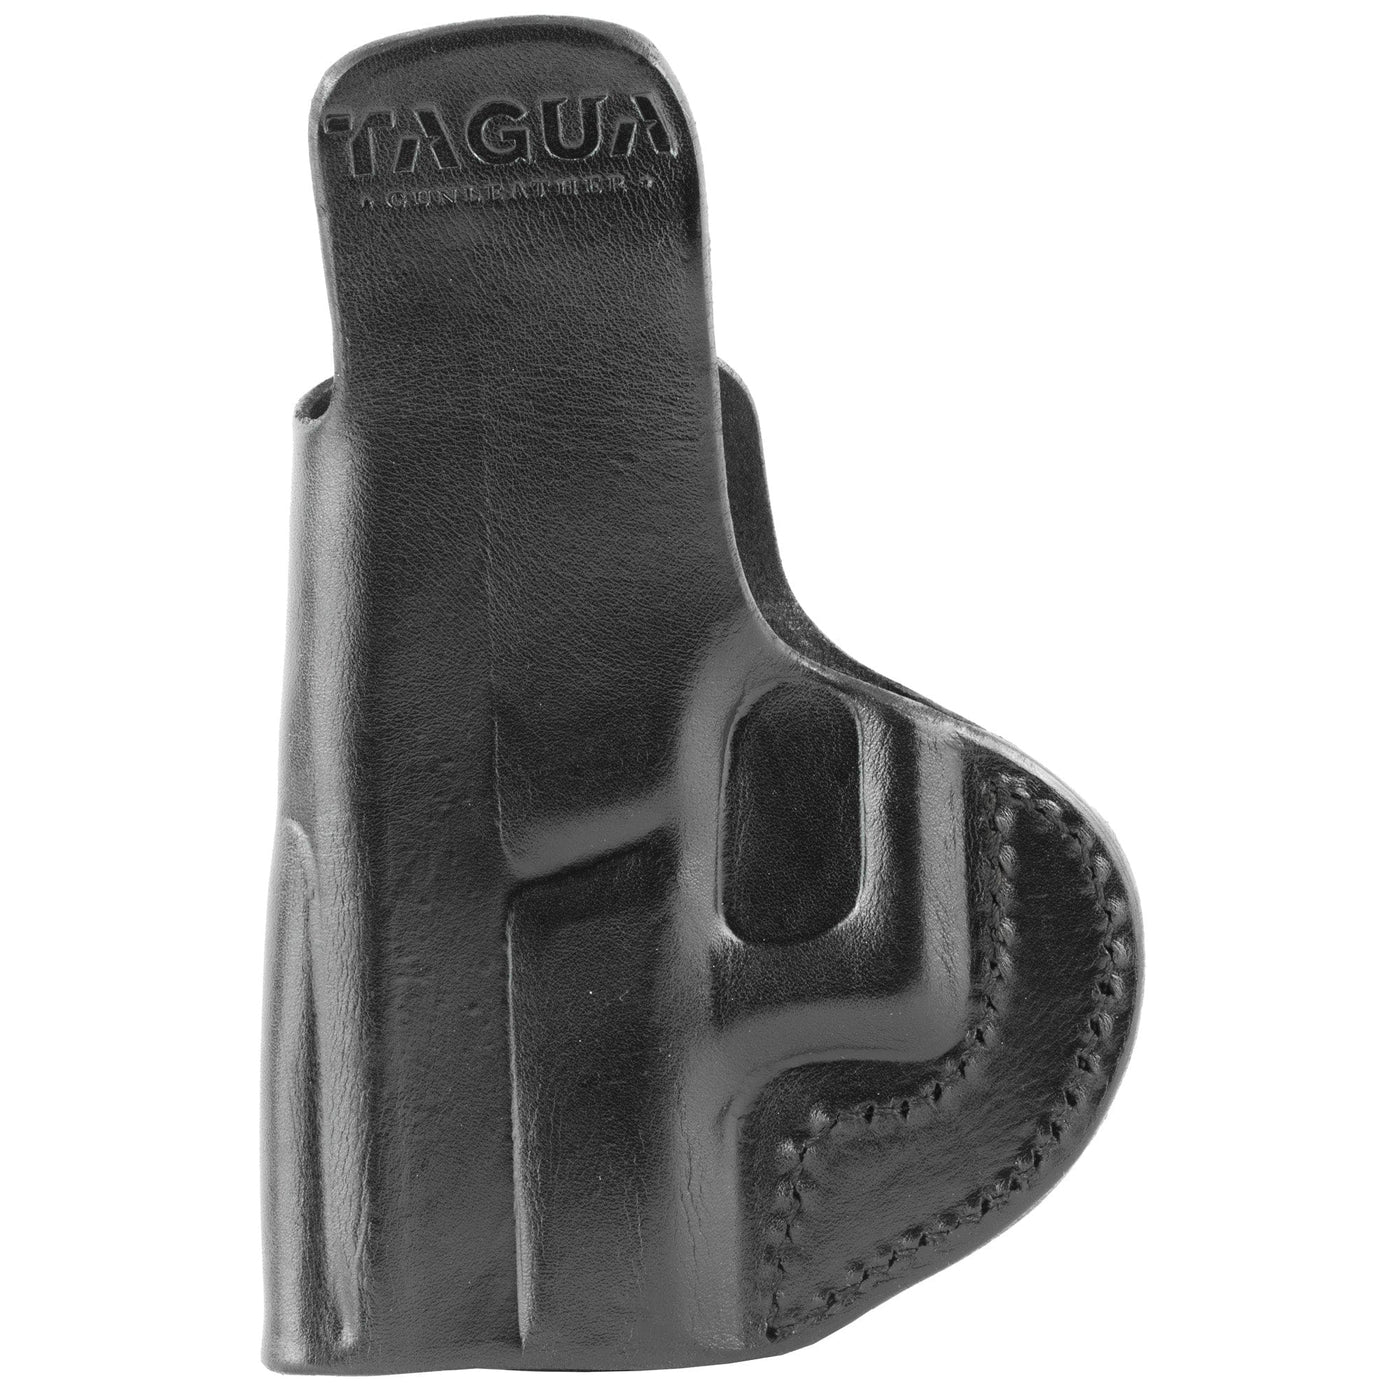 Tagua Tagua Iph In/pant For Glk 42 Rh Blk Holsters